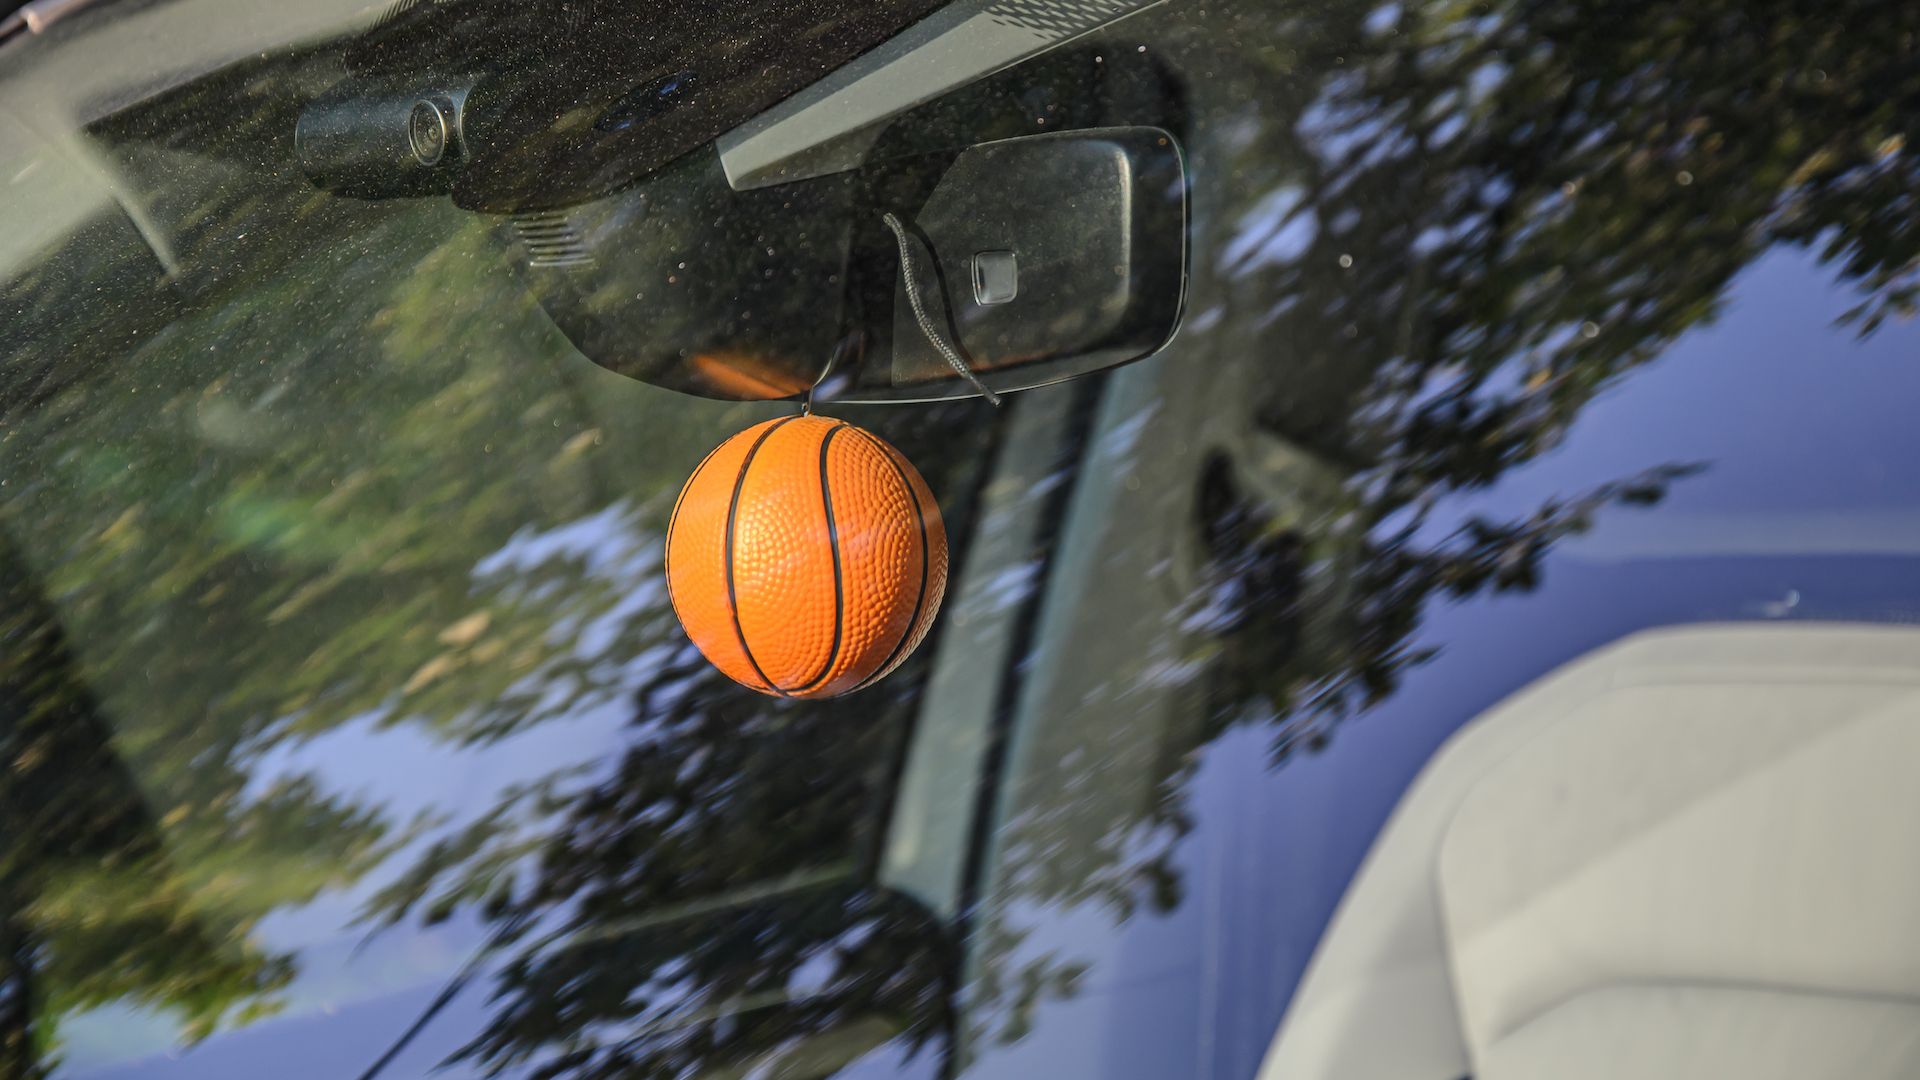 A basketball hanging from a rear-view mirror